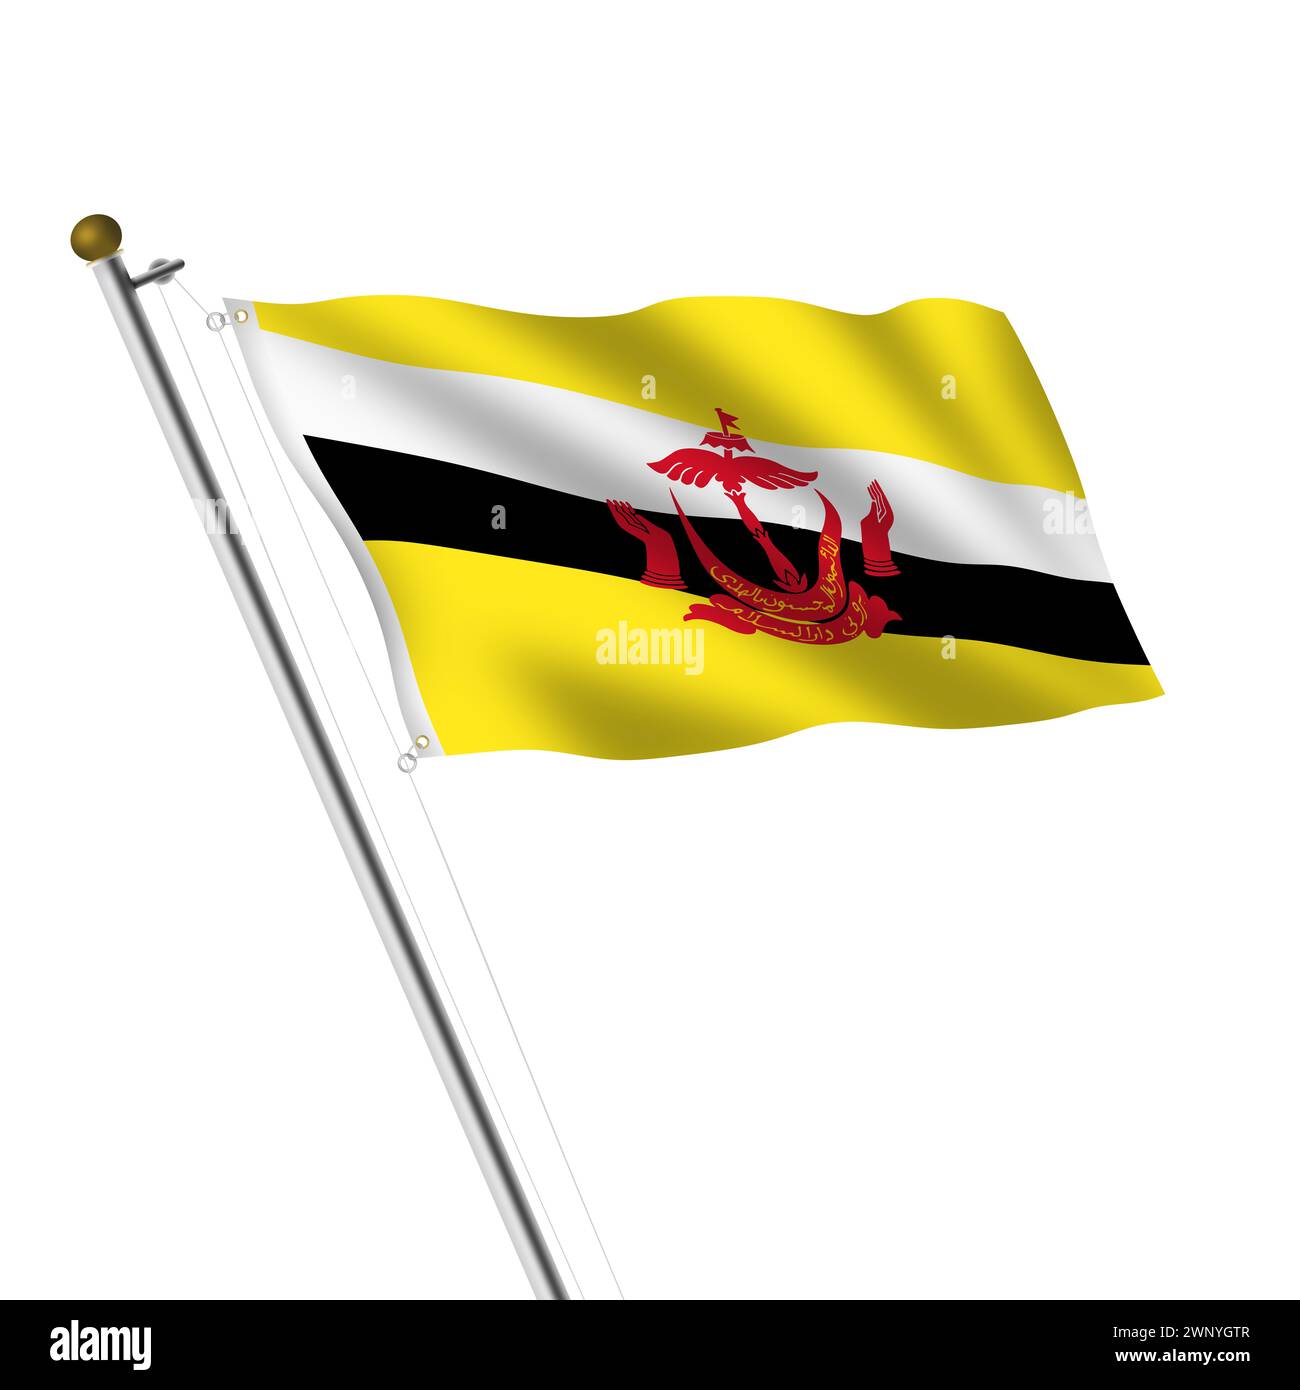 Brunei Flagpole illustration with clipping path Stock Photo